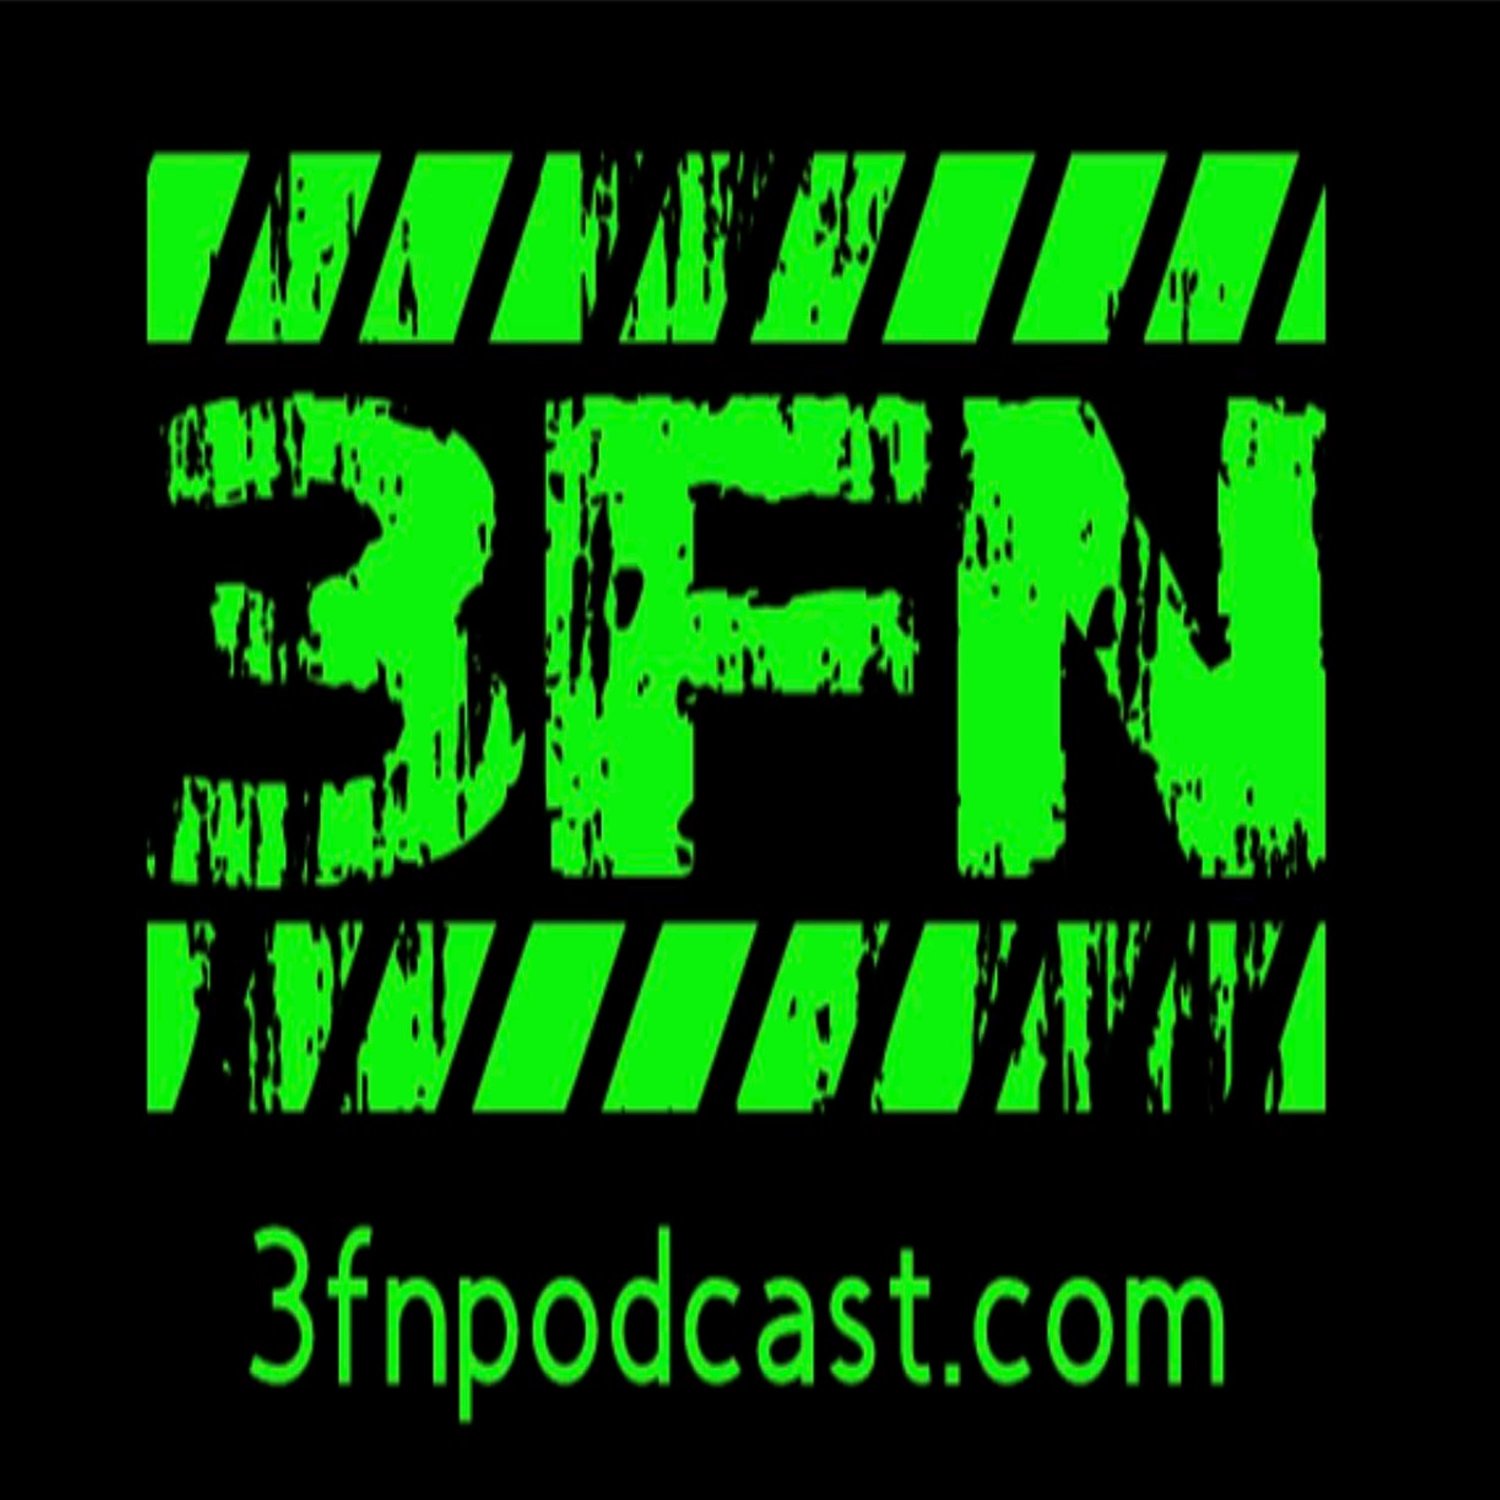 3FN Podcast